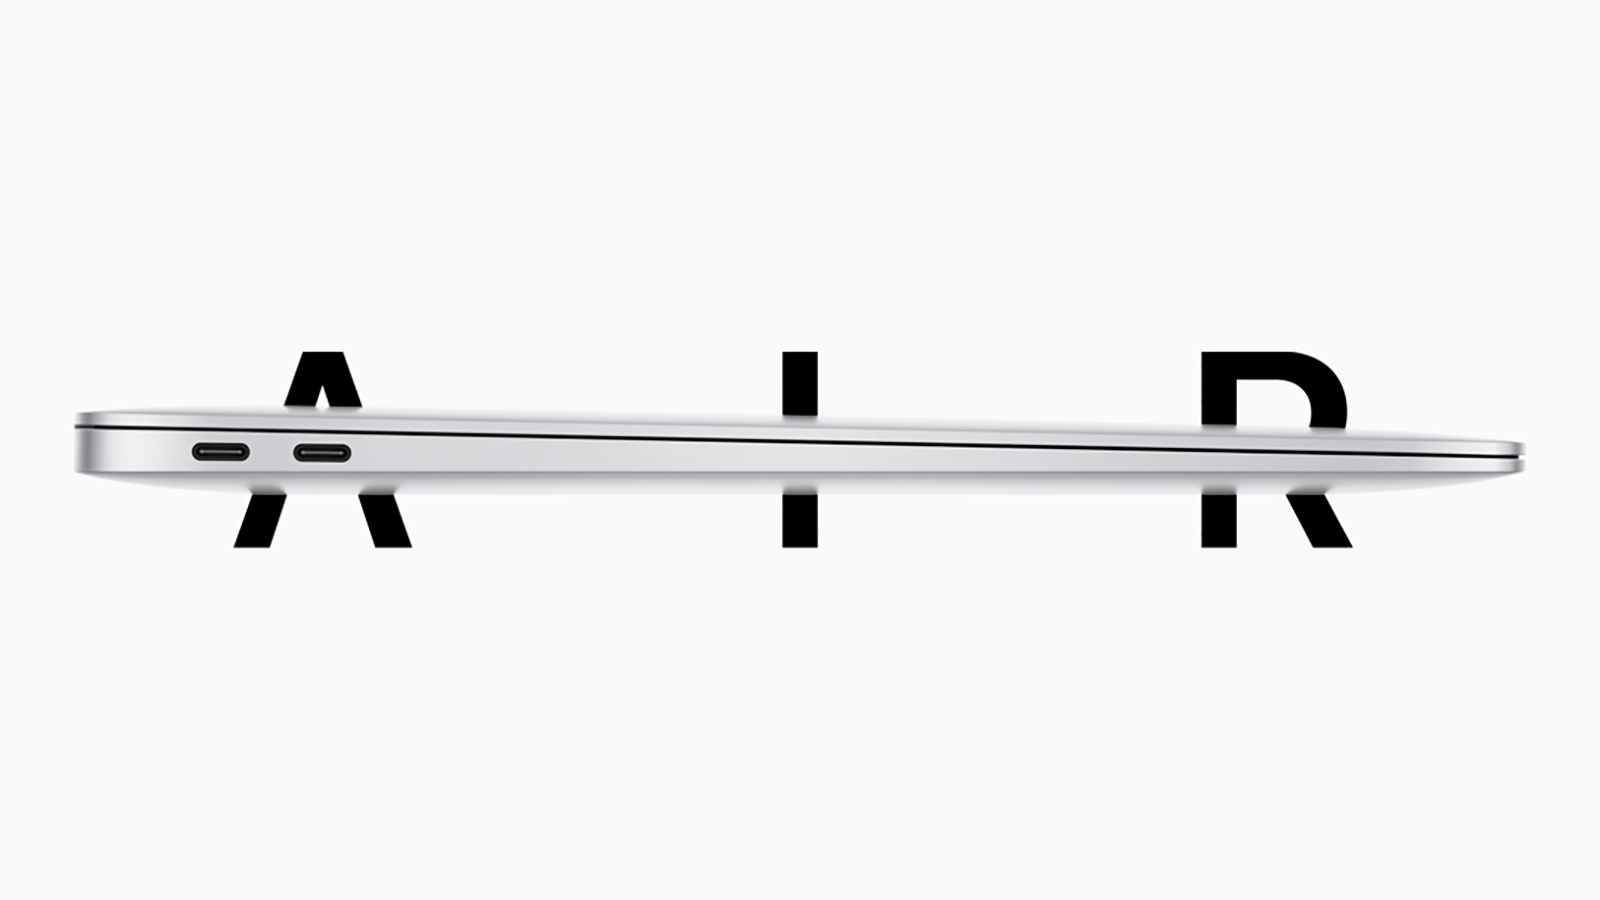 Apple's laptops now come with USB-C as standard. (Image: Apple)